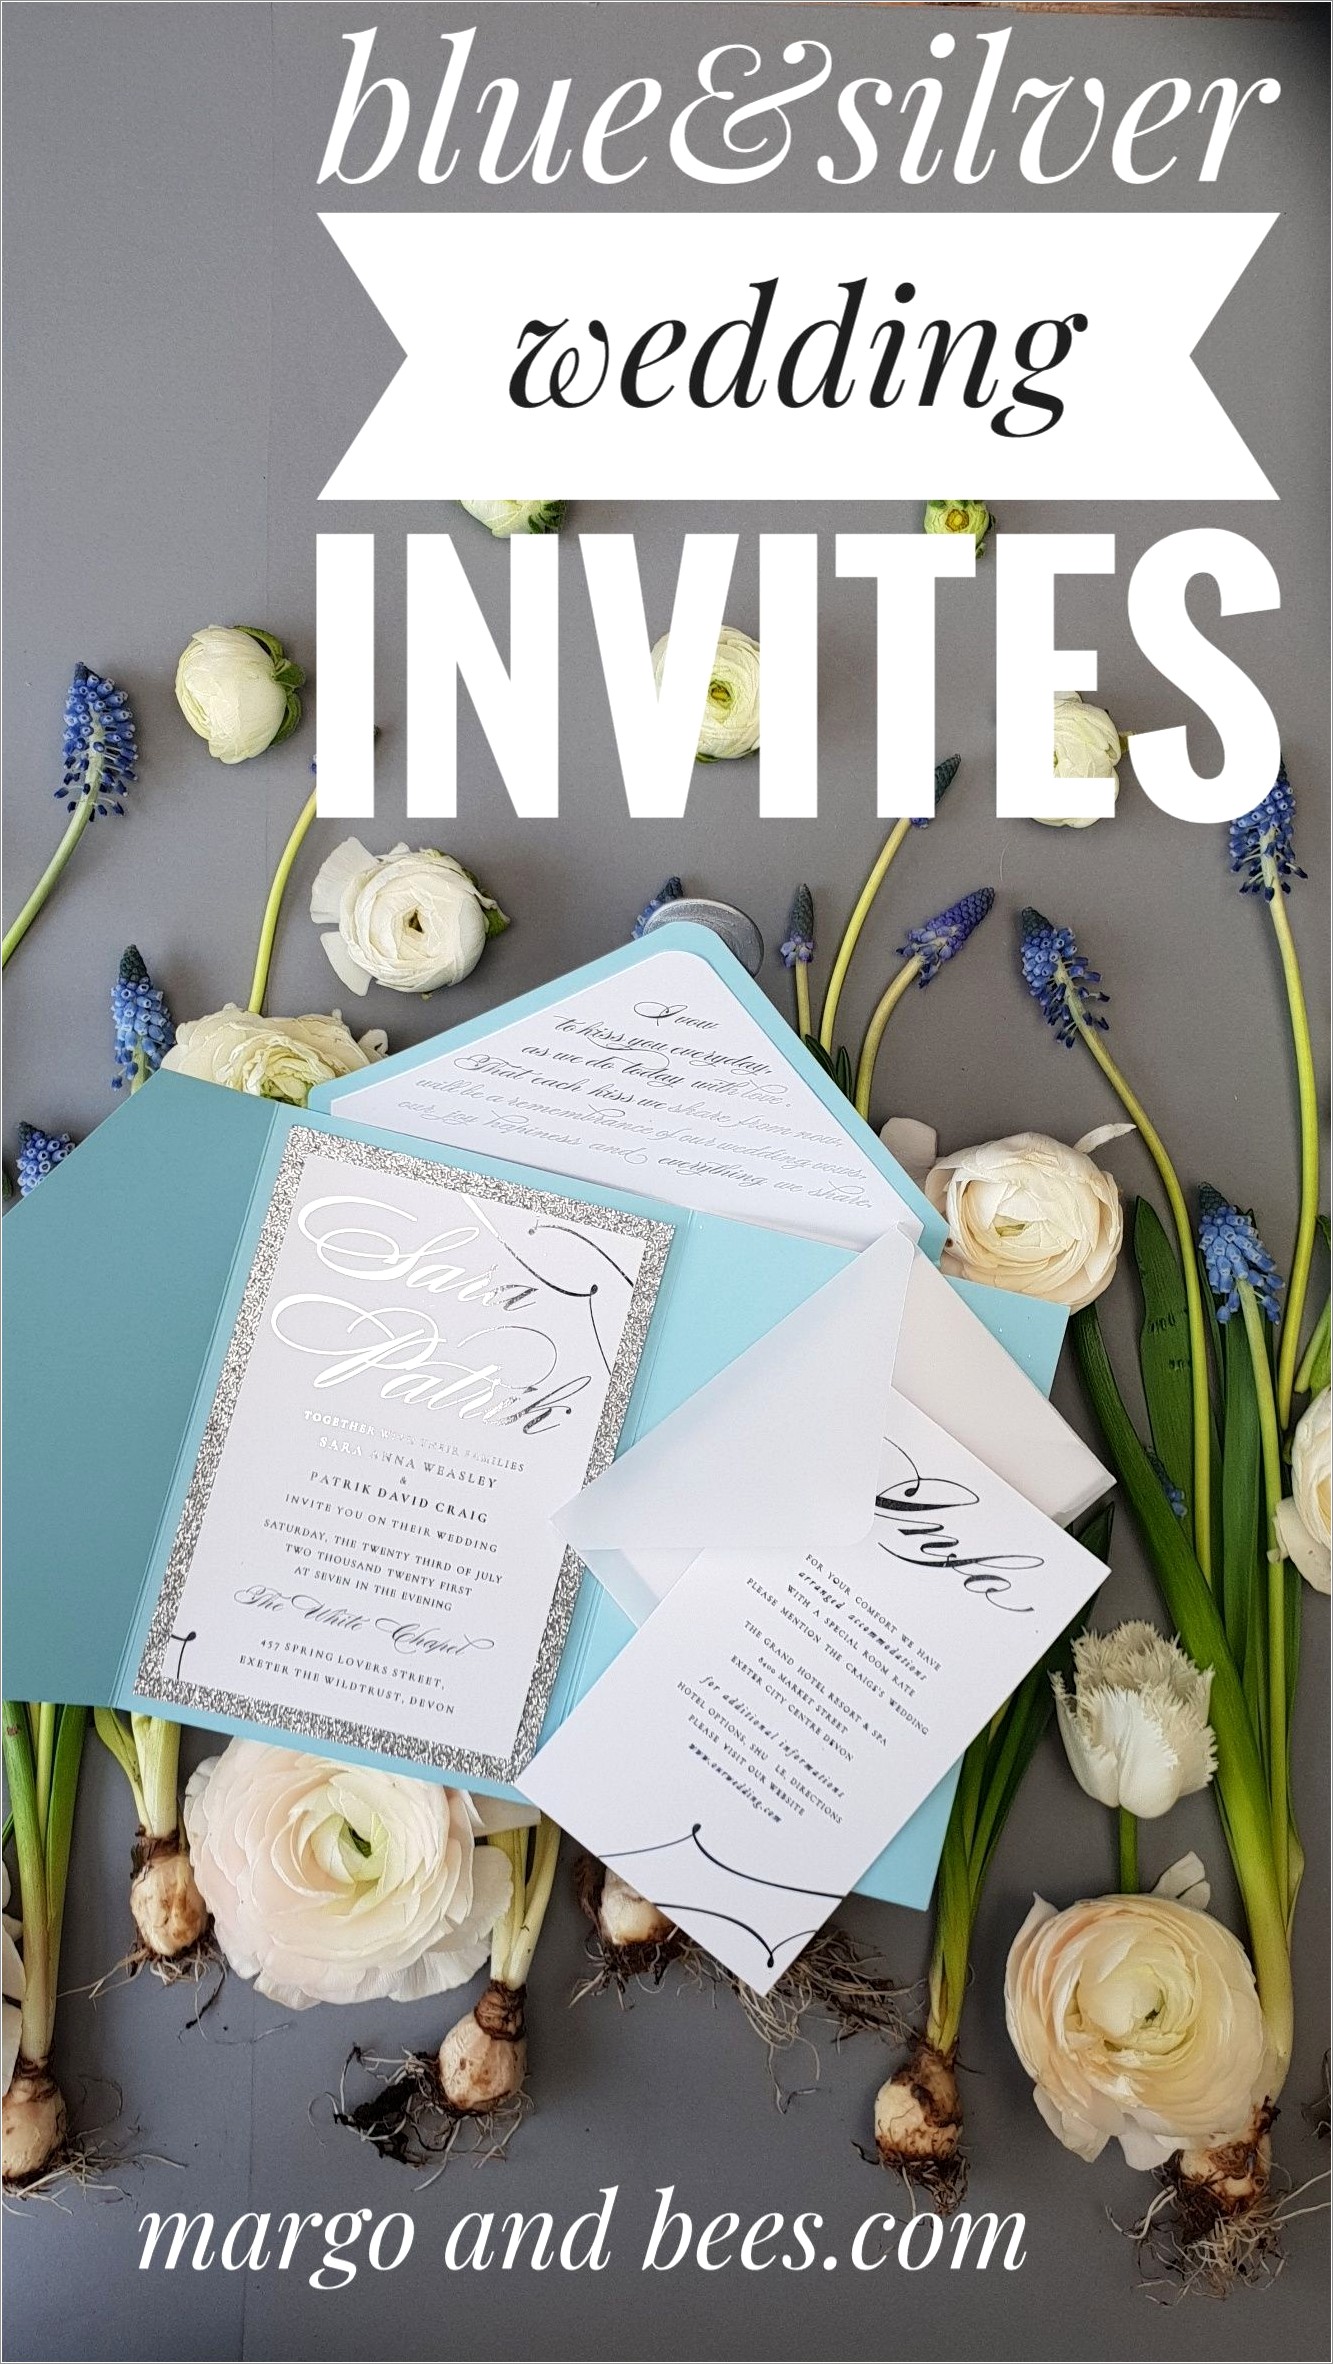 Baby Blue And Silver Wedding Invitations